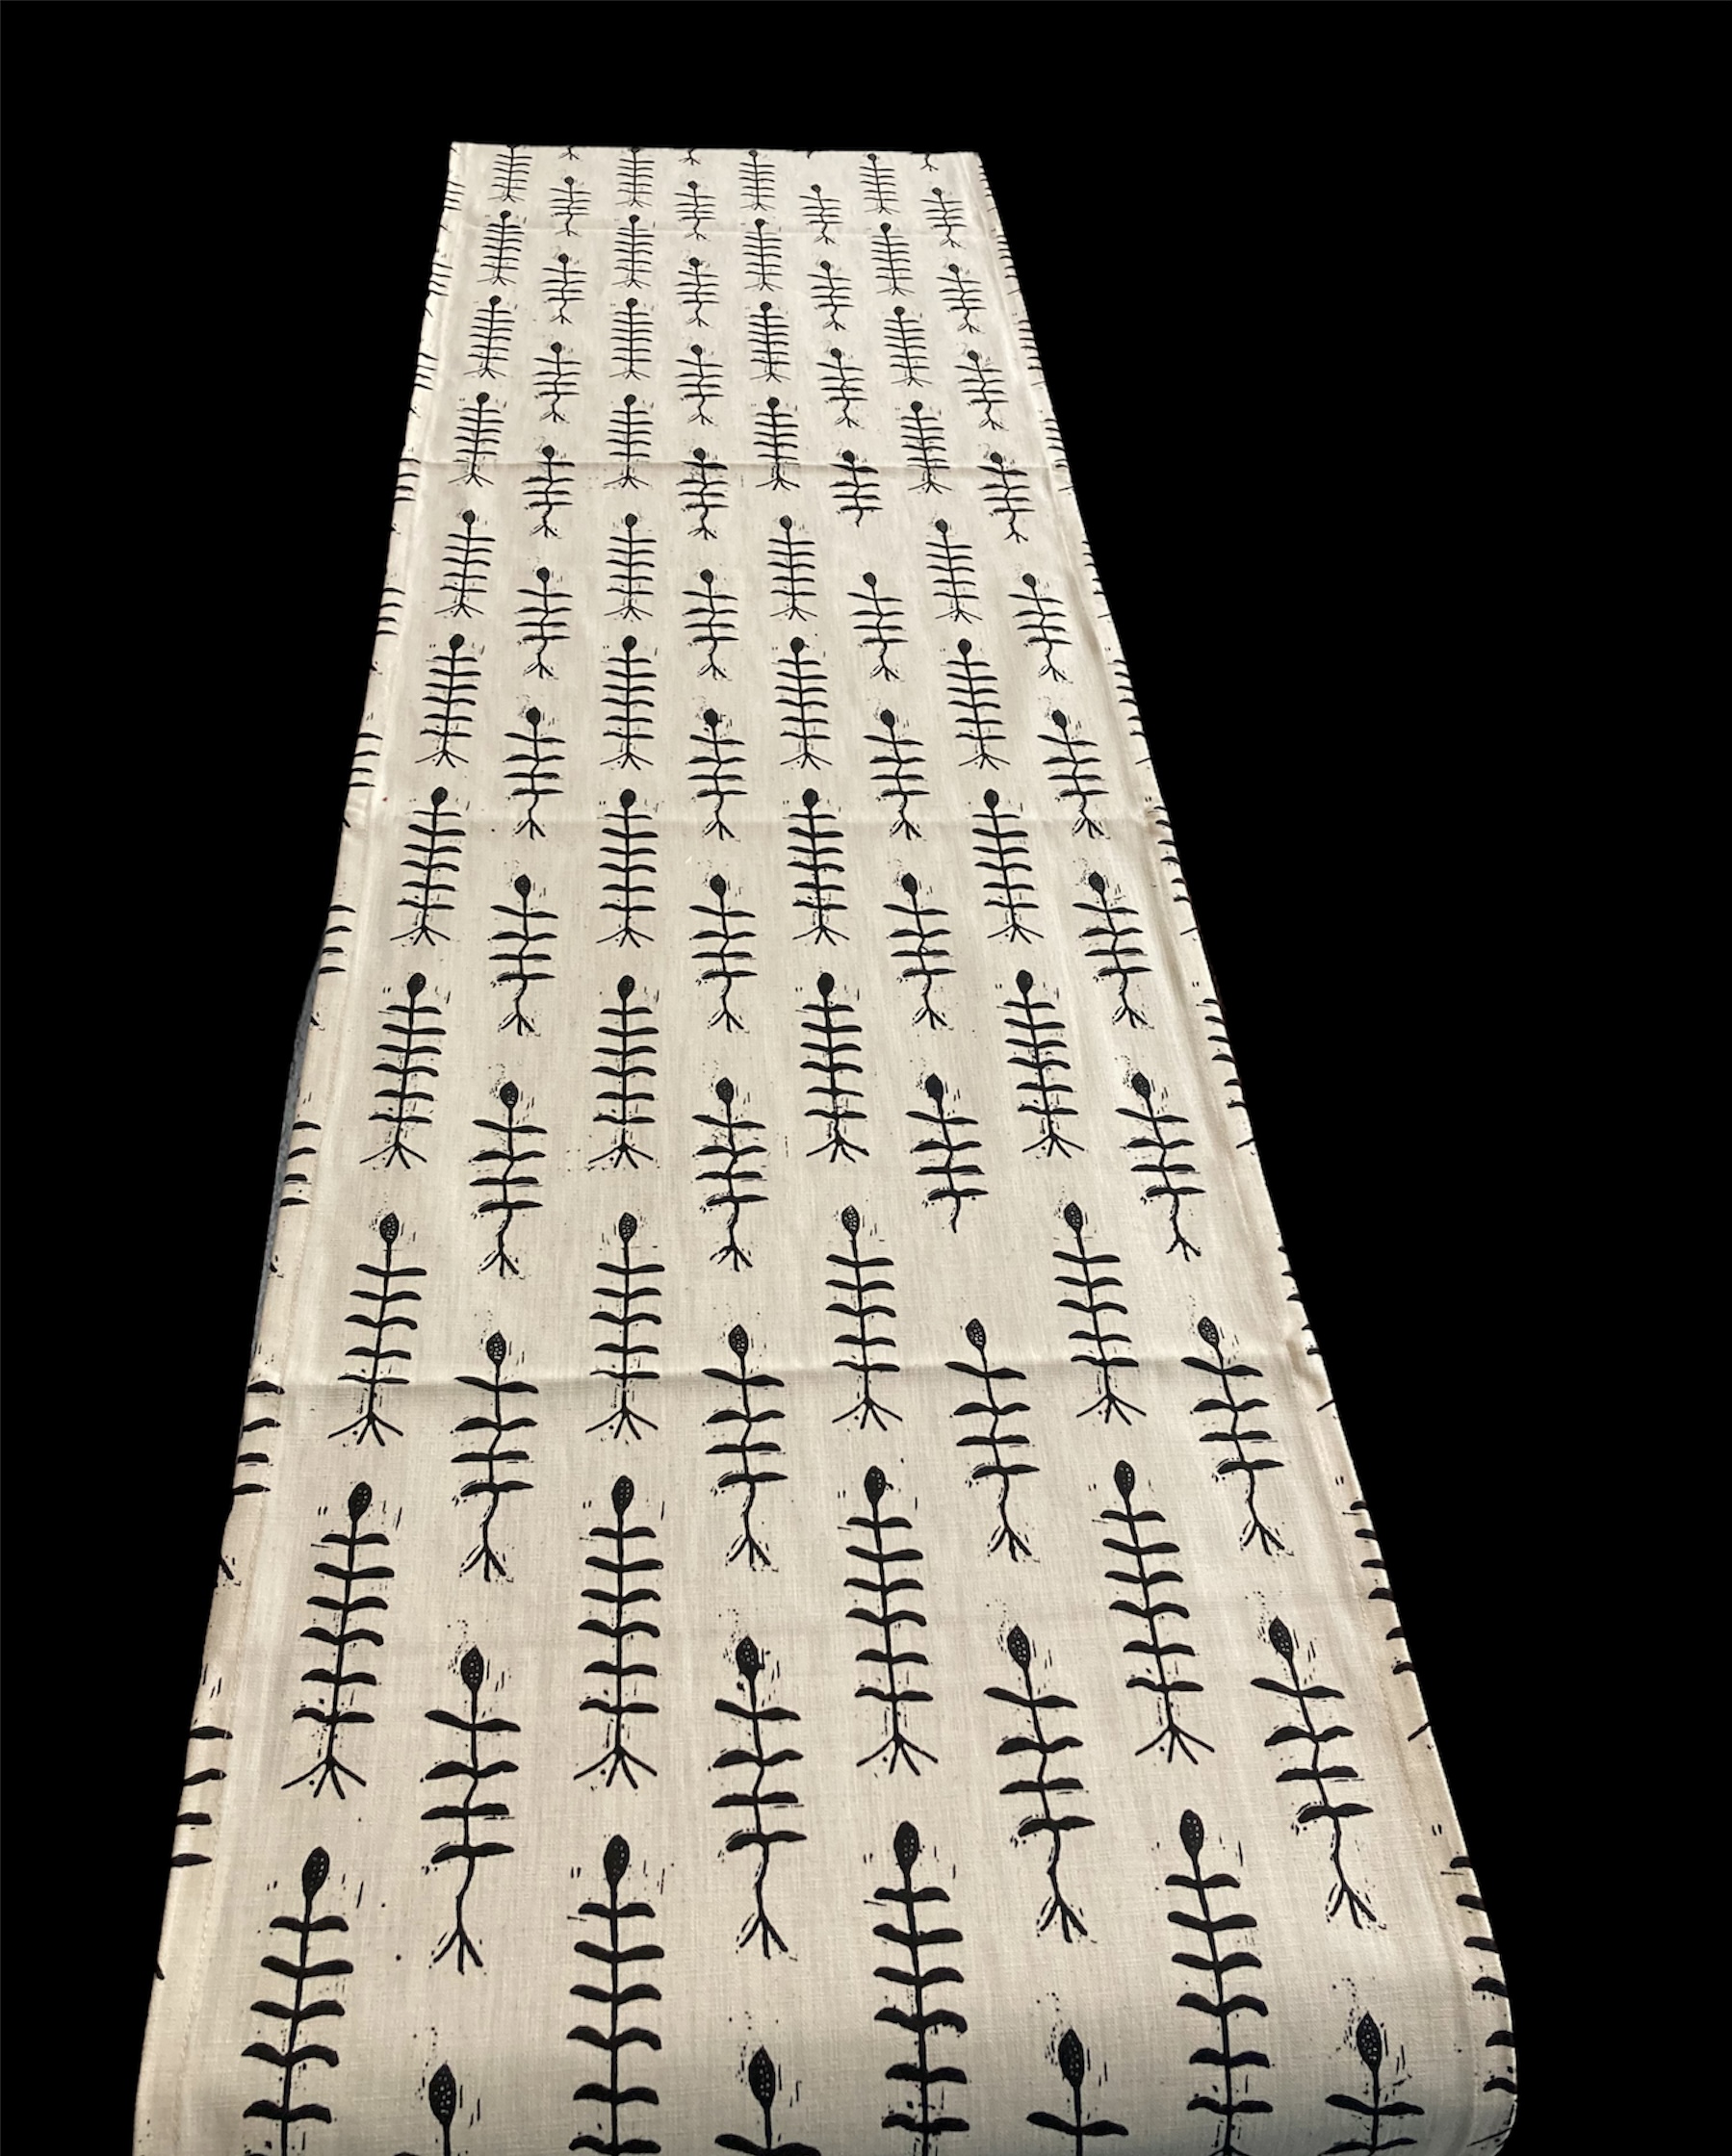 100% cotton Table Runner 96" x 16" from Namibia - Design bw27l